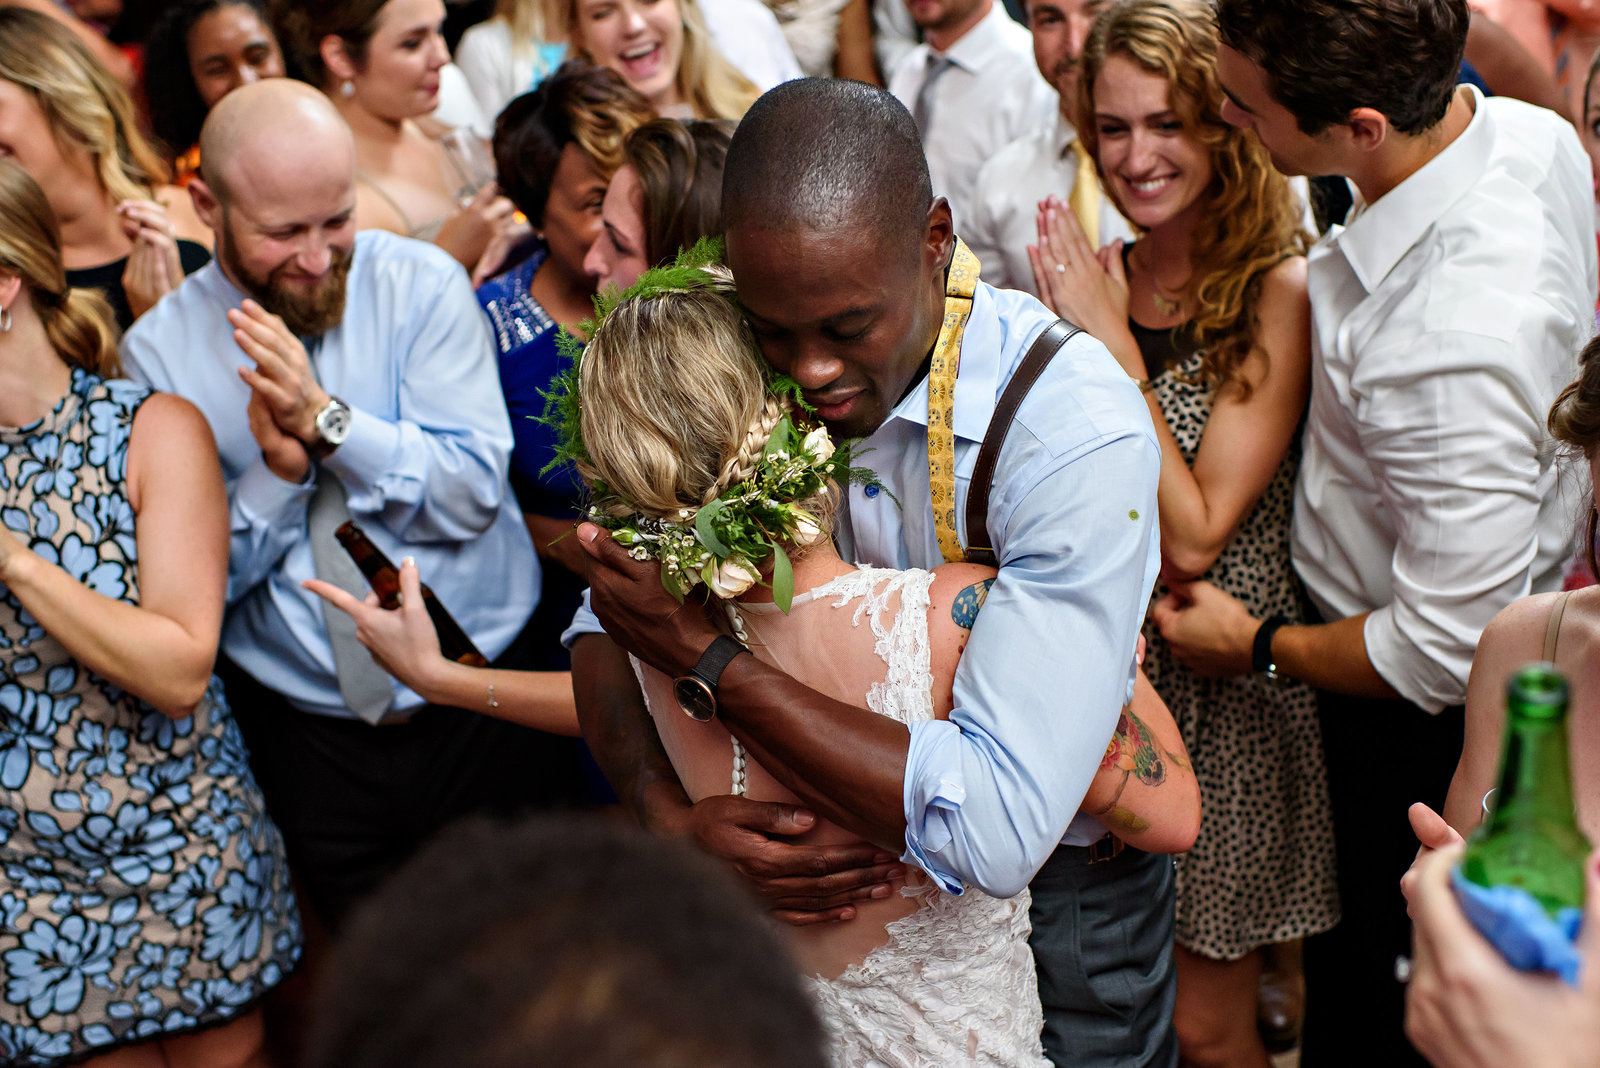 A loving embrace from a groom to his bride during the last song at their reception in Baltimore, MD.